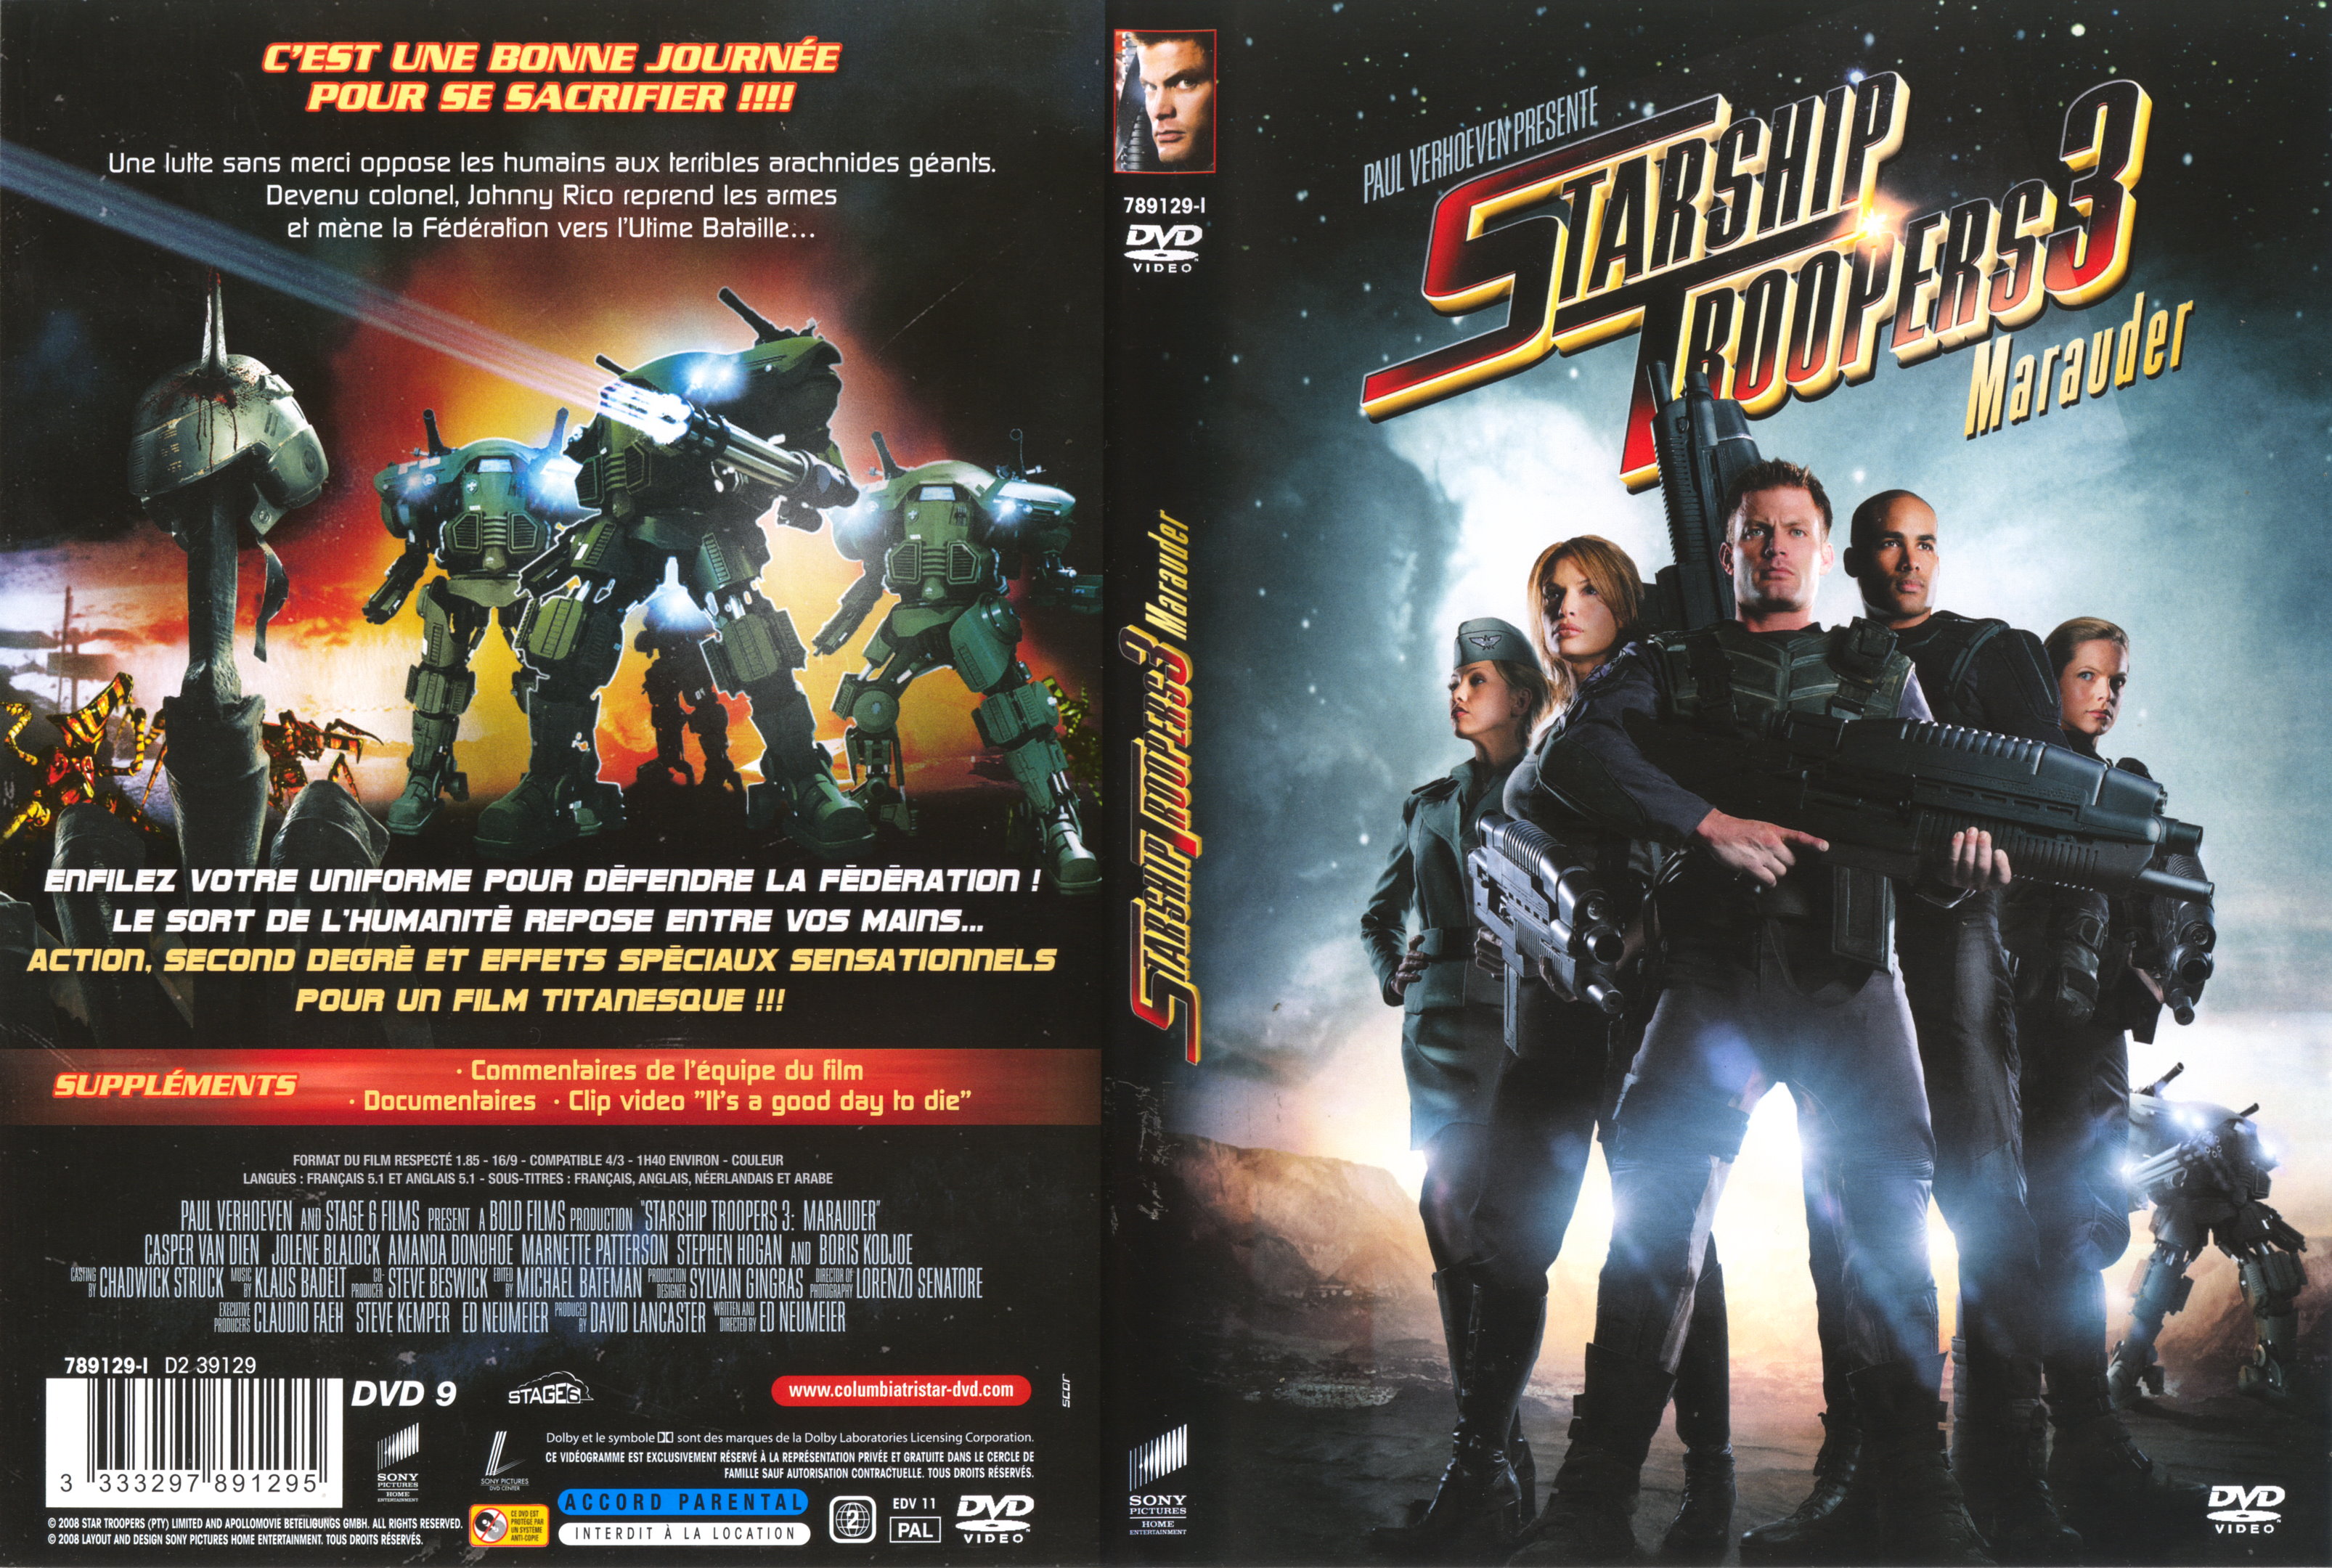 Jaquette DVD Starship troopers 3 v2